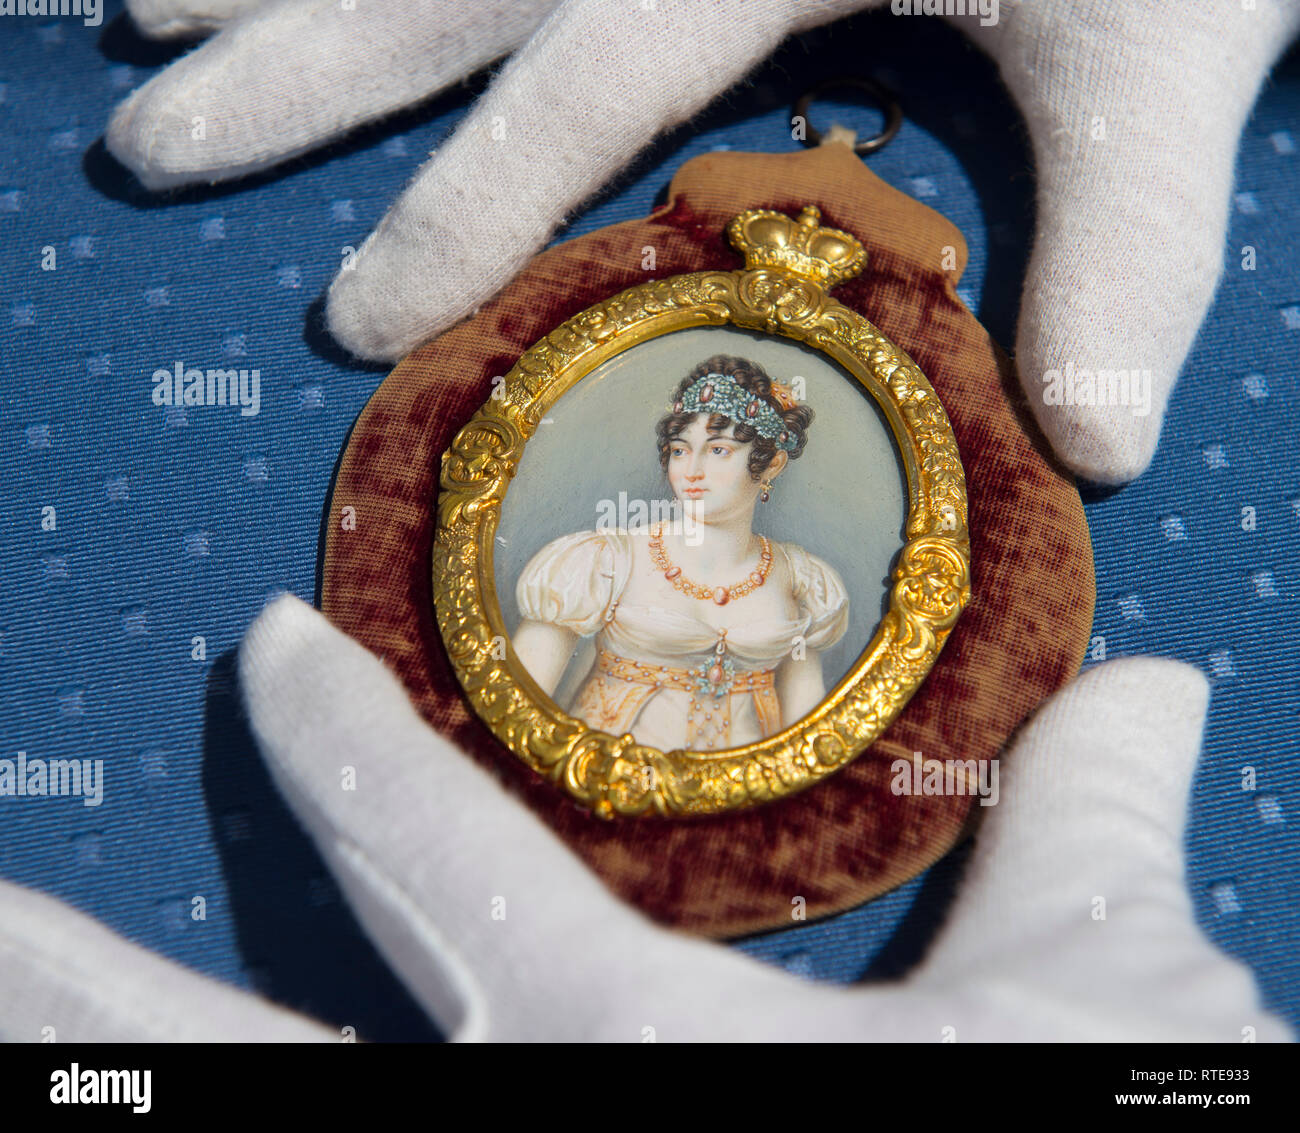 Bonhams, Knightsbridge, London, UK. 1 March, 2019. Private collection and Gallery of Alain Morvan Antiquitäten previewed before their sale at Bonhams on 6 March. Image: Portrait miniature, sister of Napoleon. Credit: Malcolm Park/Alamy Live News. Stock Photo